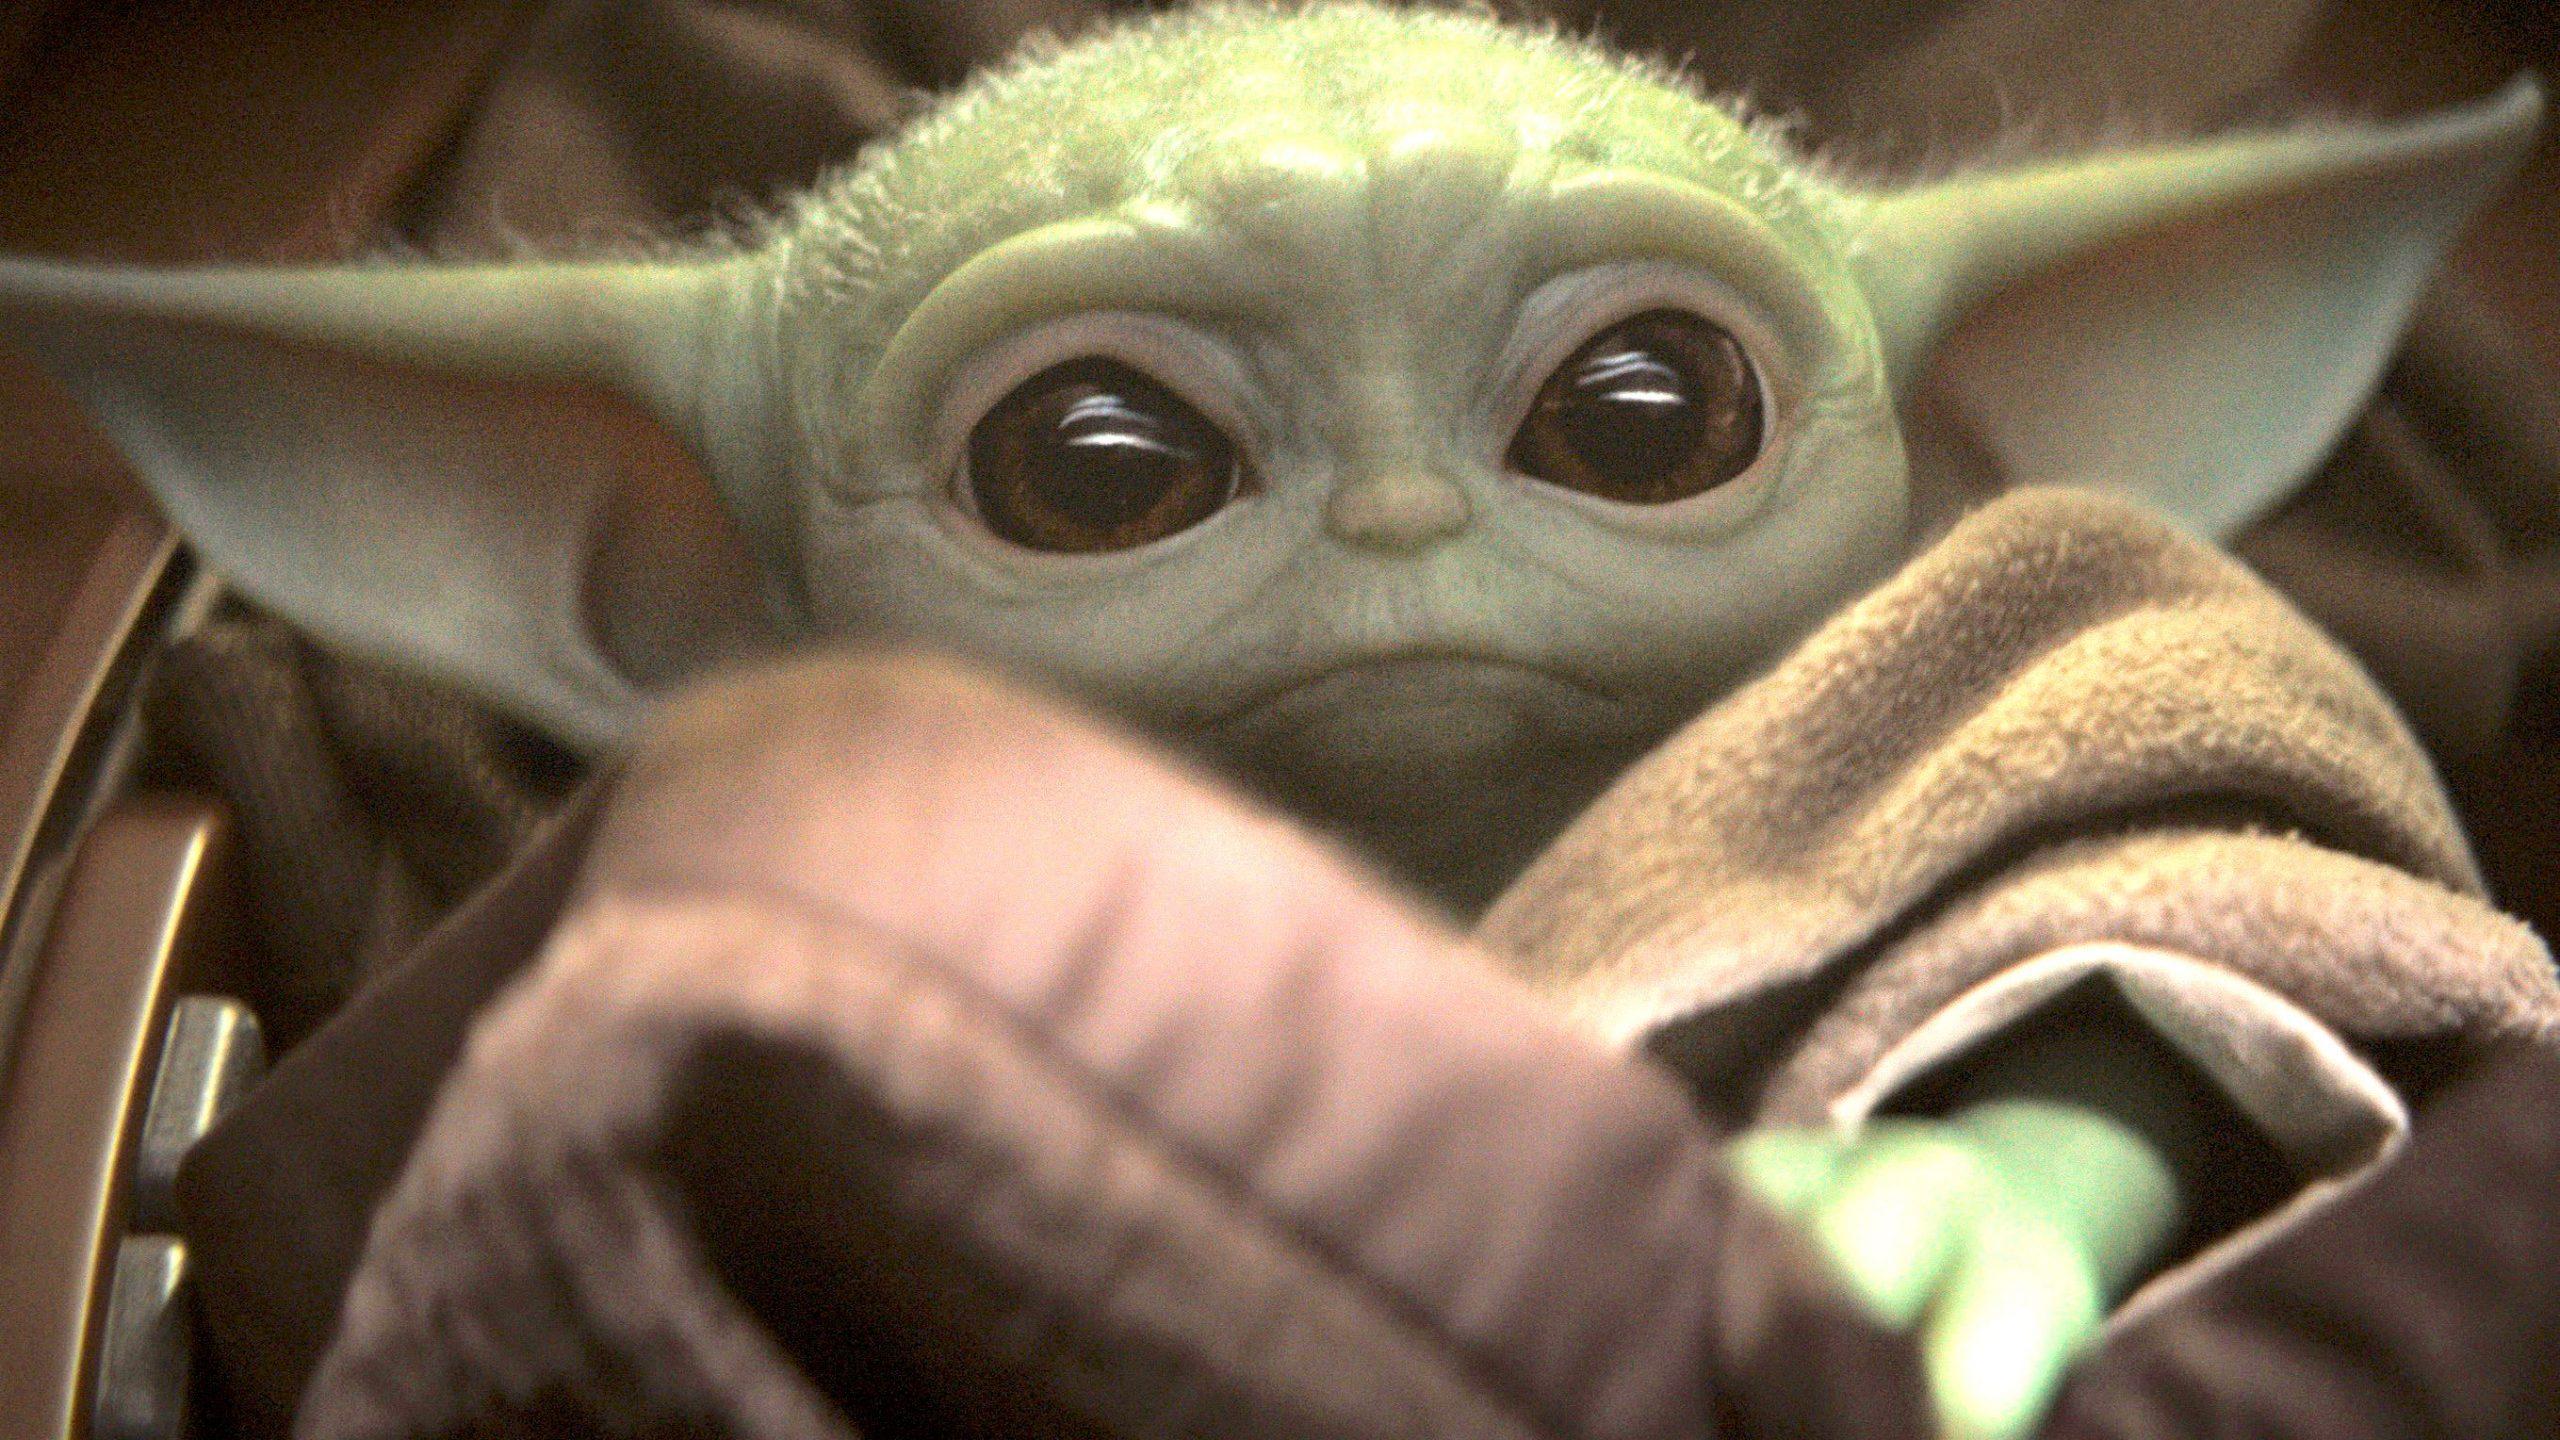 Bring Home Your Own Baby Yoda at Star Wars: Galaxy's Edge